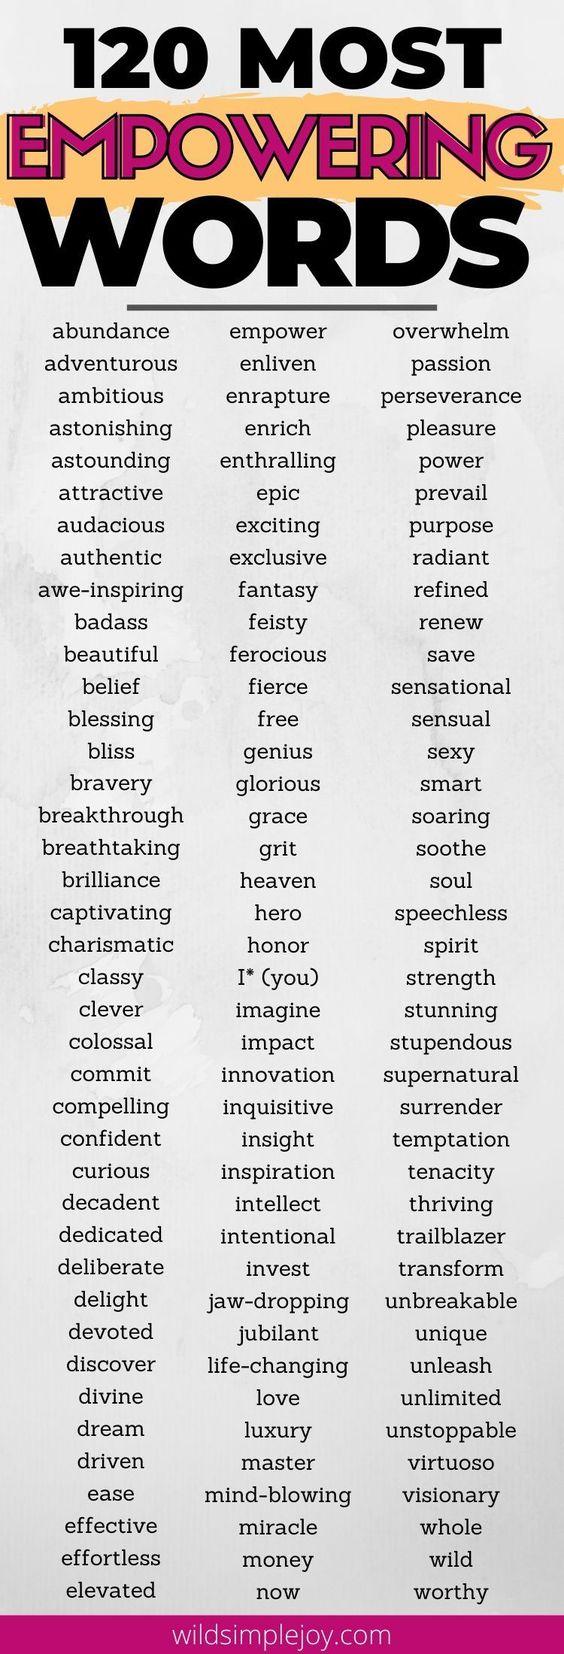 Grammar corner 120 of the Most Empowering Words in English